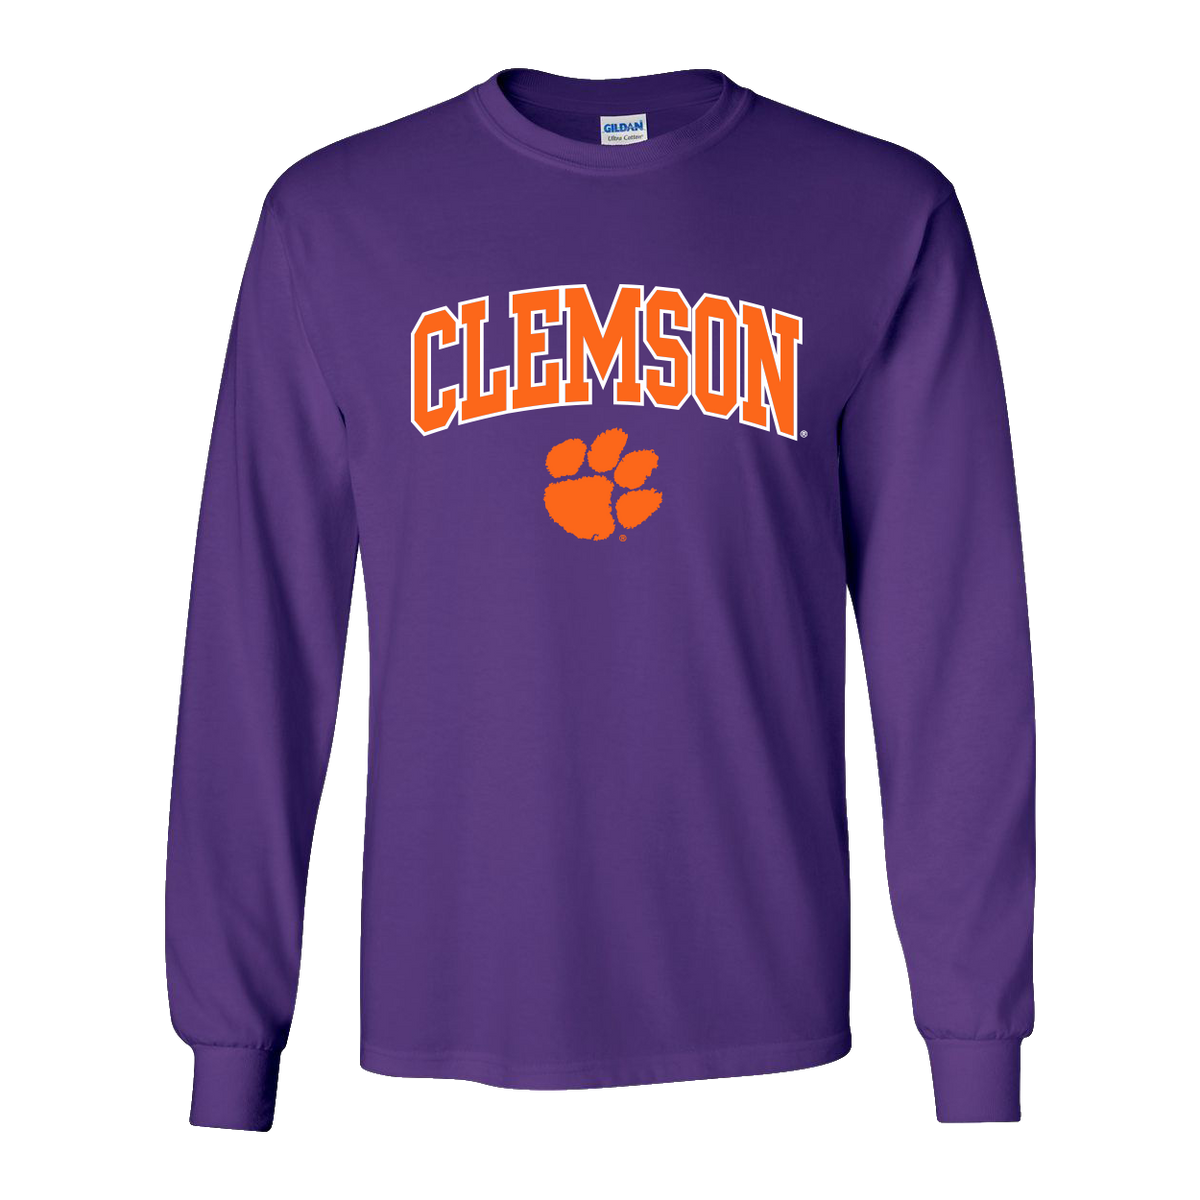 Clemson Orange and White Arch and Paw Long Sleeve Tee - Purple